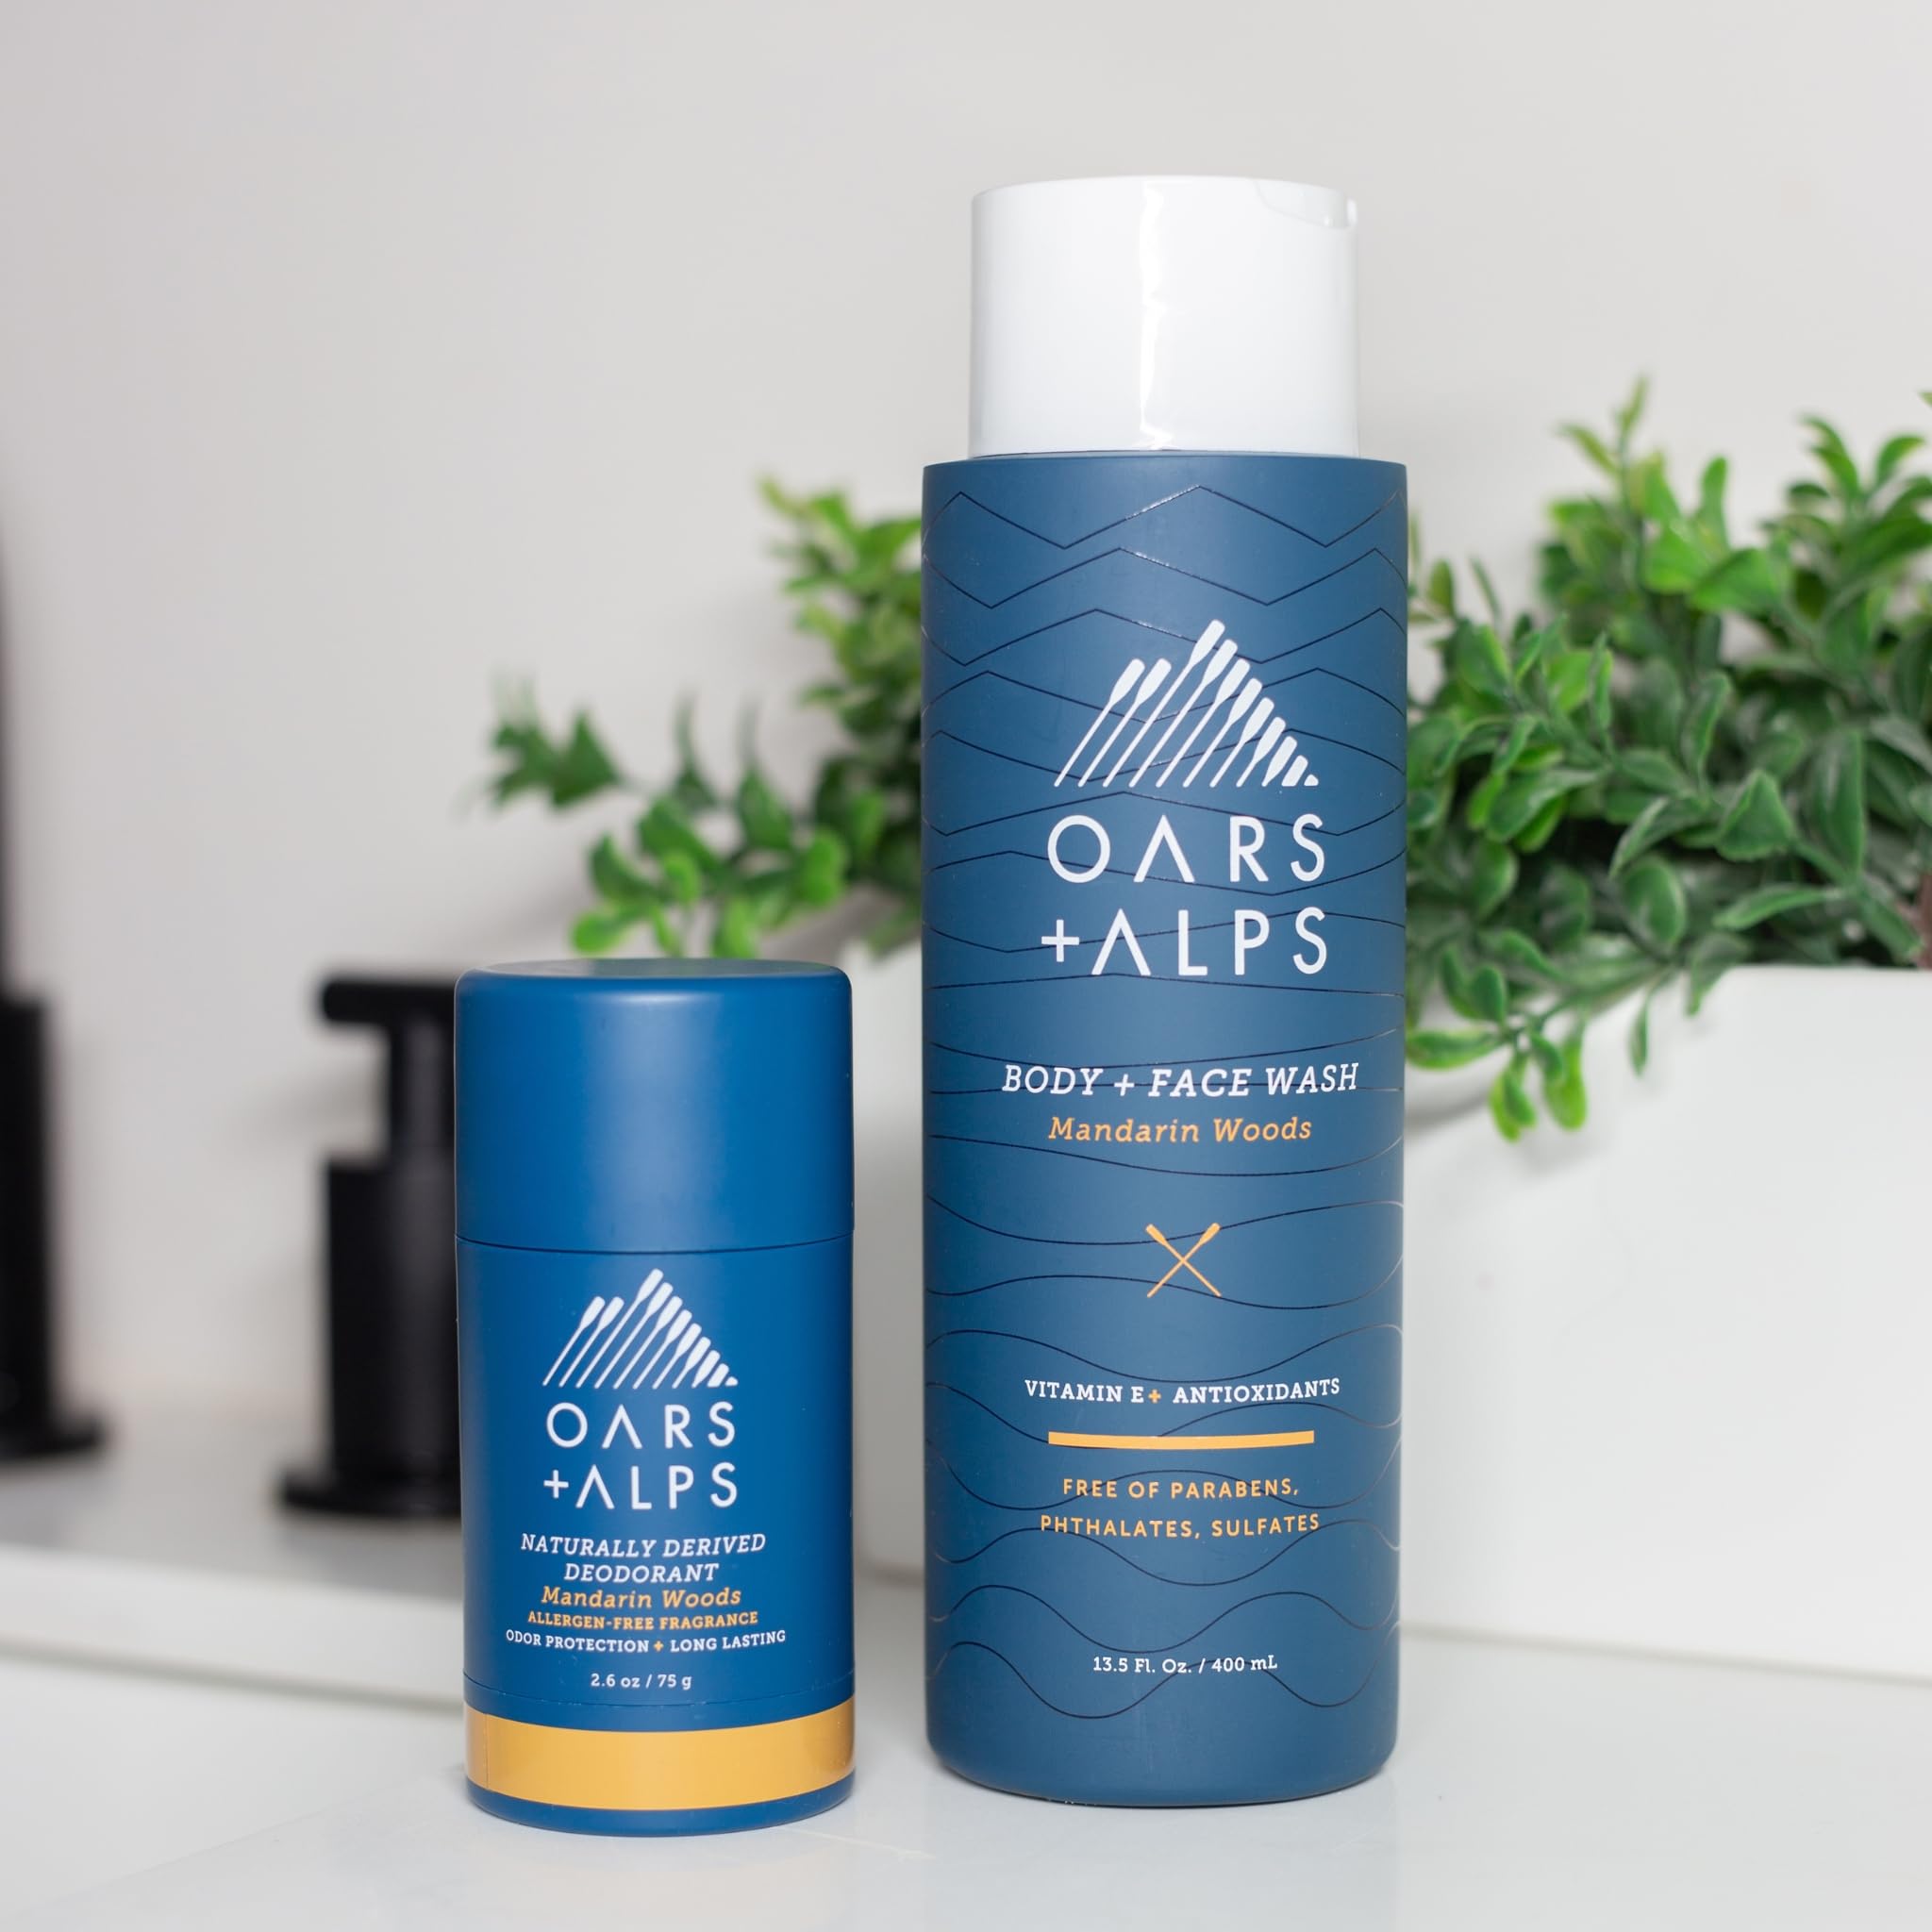 Oars + Alps Mens Moisturizing Body and Face Wash, Skin Care Infused with Vitamin E and Antioxidants, Sulfate Free, Mandarin Woods, 1 Pack